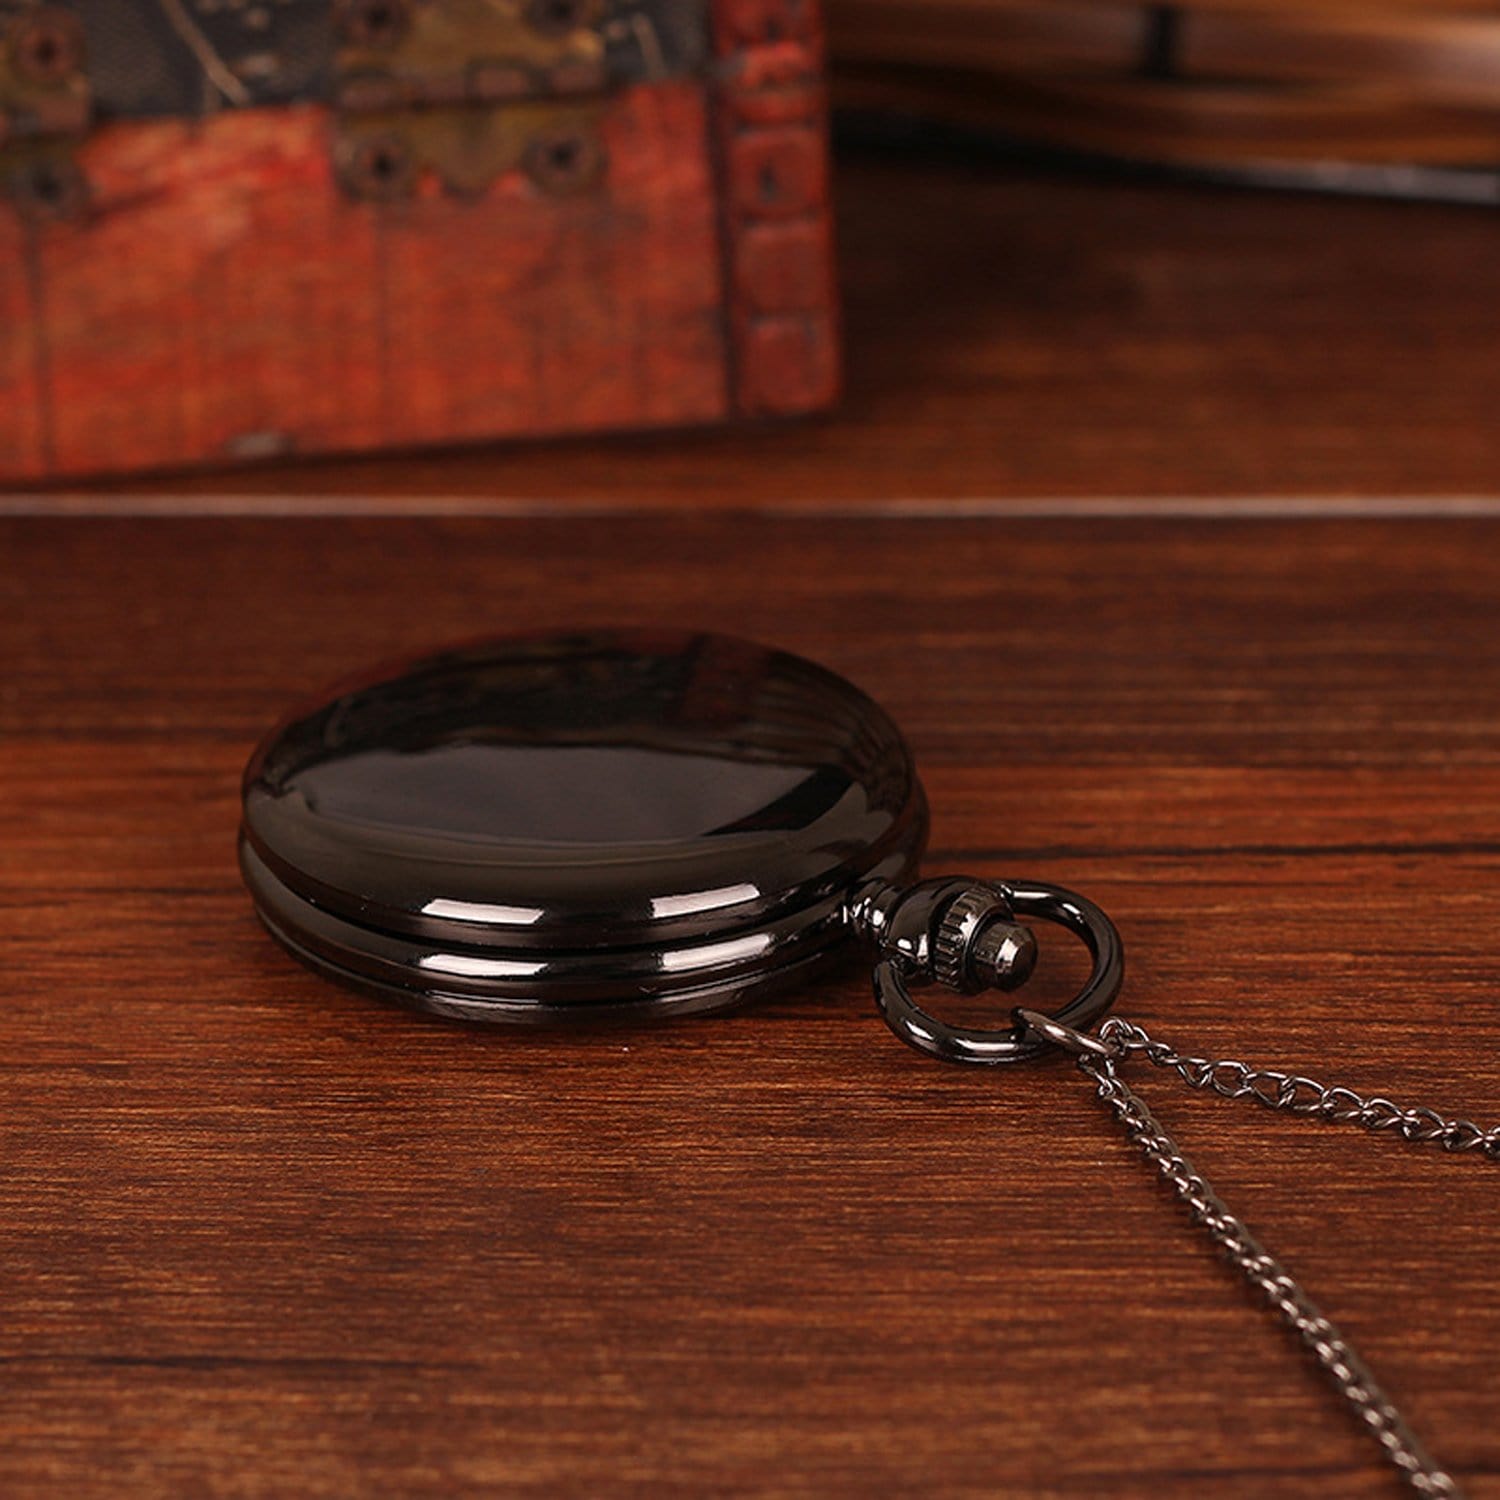 Pocket Watches To My Husband - You Are My Everything Pocket Watch GiveMe-Gifts